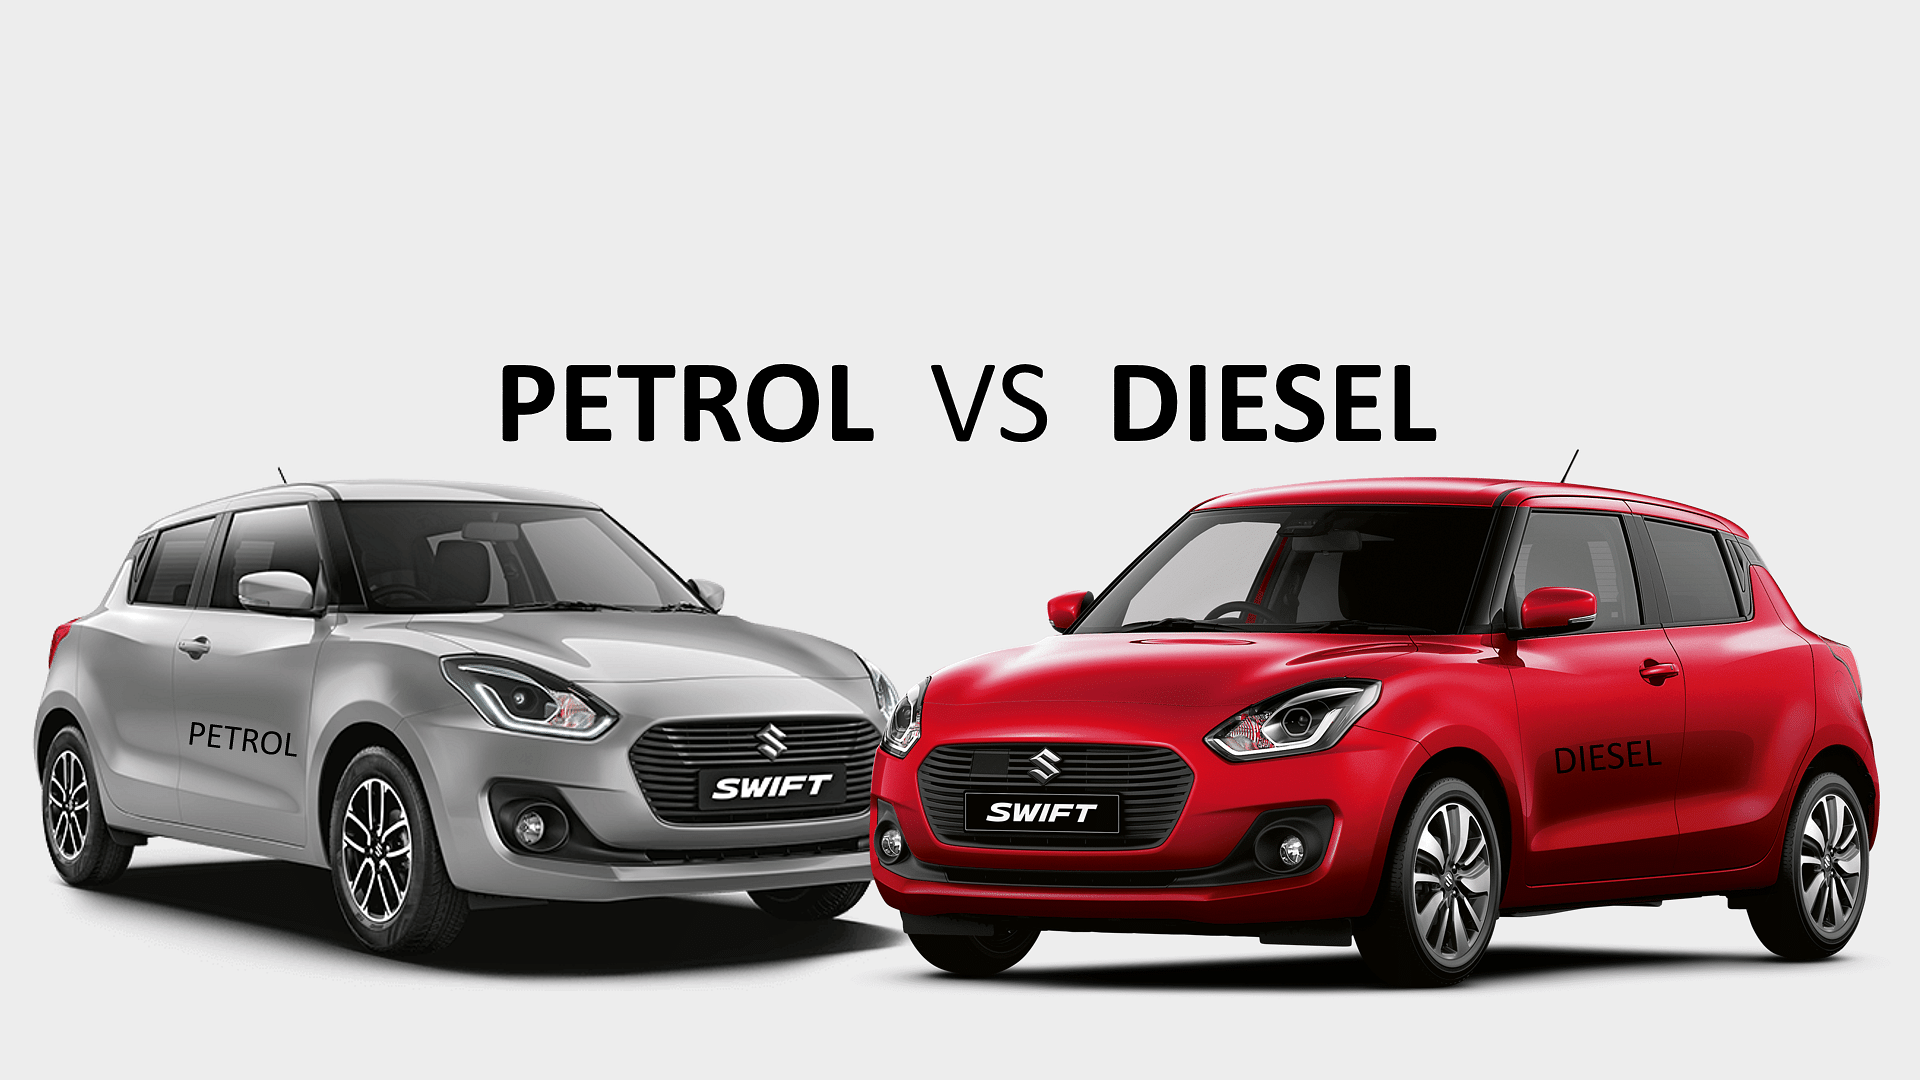 The diesel Swift has a fuel efficiency of 28 kmpl, compared to 22 kmpl for the petrol.